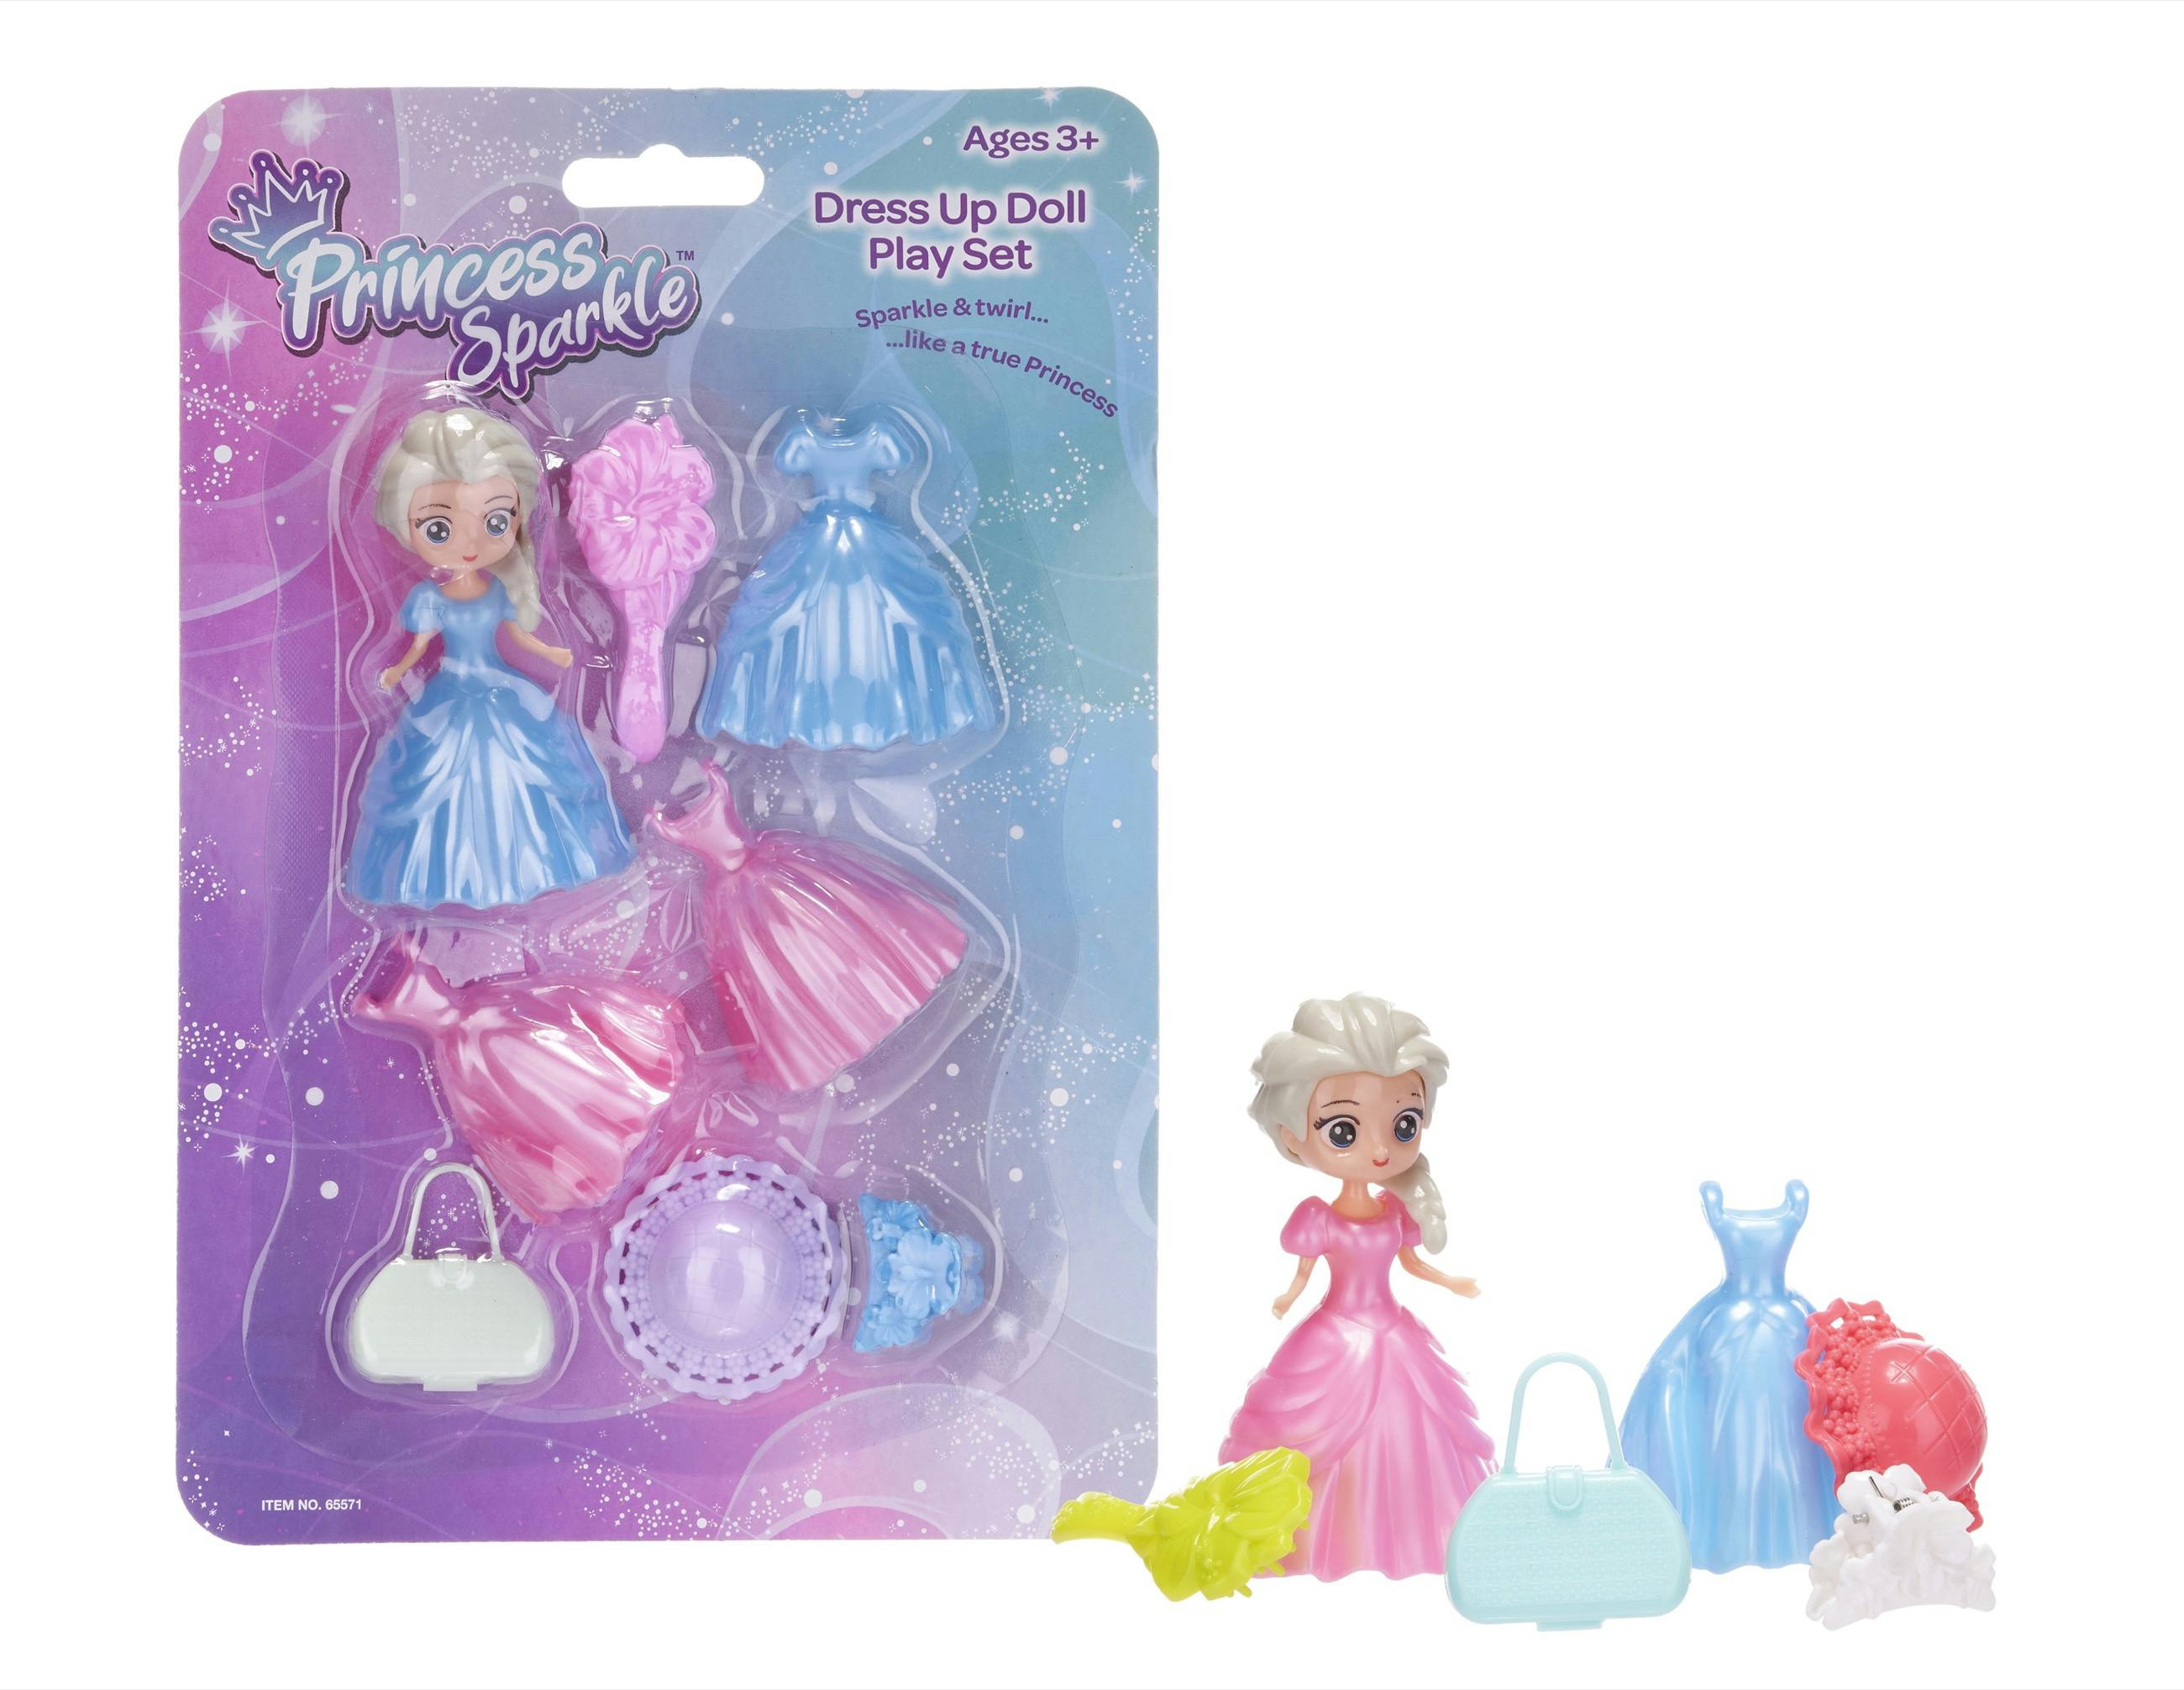 Product - Dress Up Doll Playset